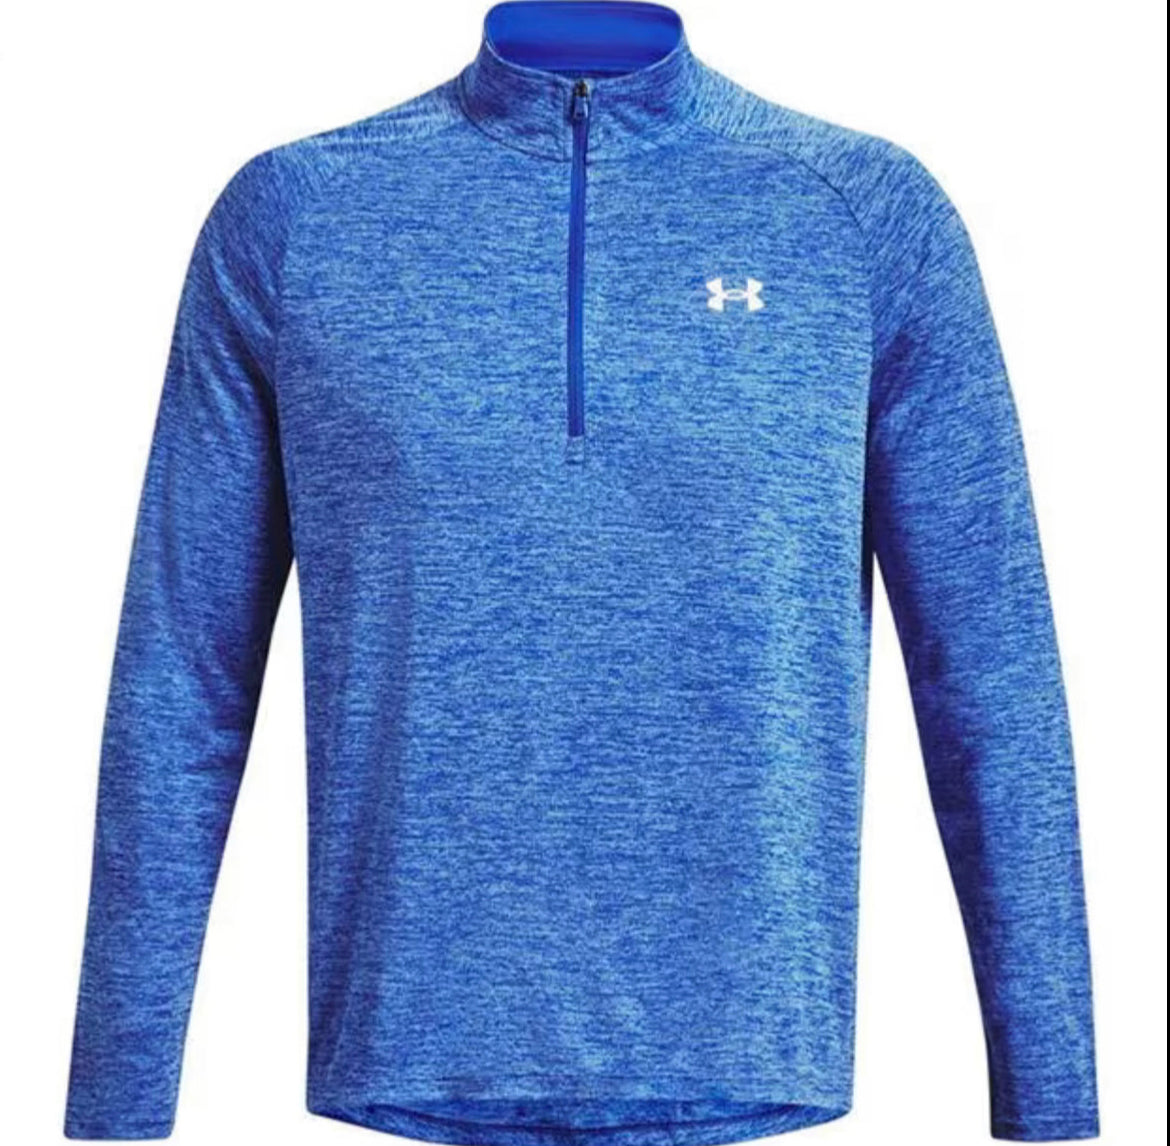 UNDER ARMOUR TECH FULL TRACKSUIT - ROYAL BLUE / GREY